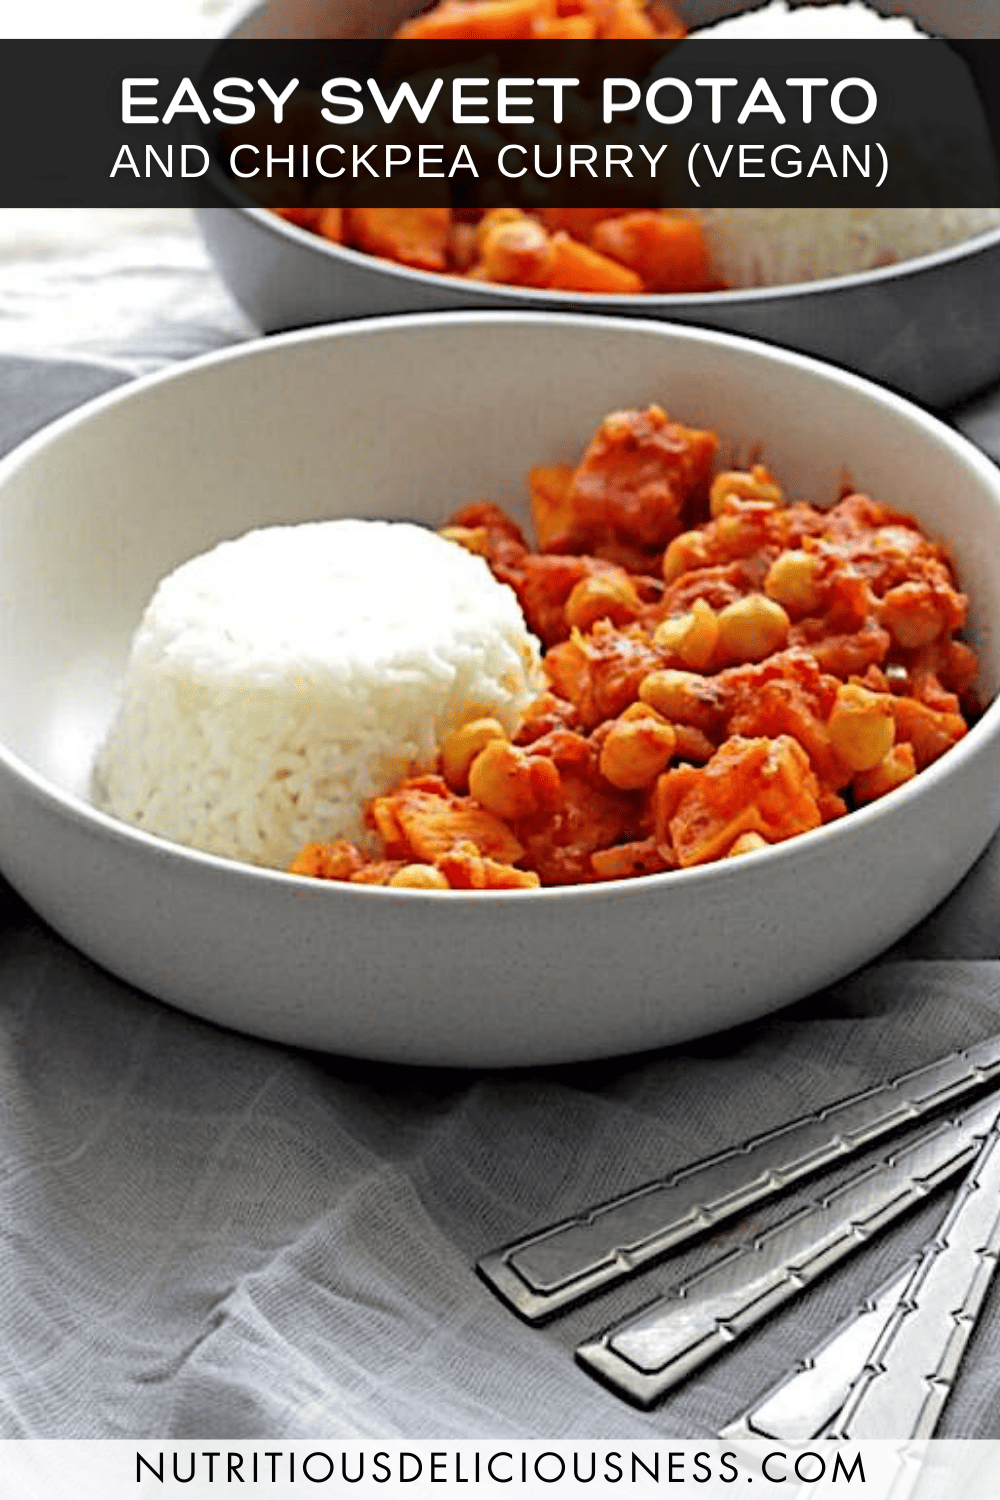 Easy Sweet Potato and Chickpea Curry (Vegan) – Nutritious Deliciousness